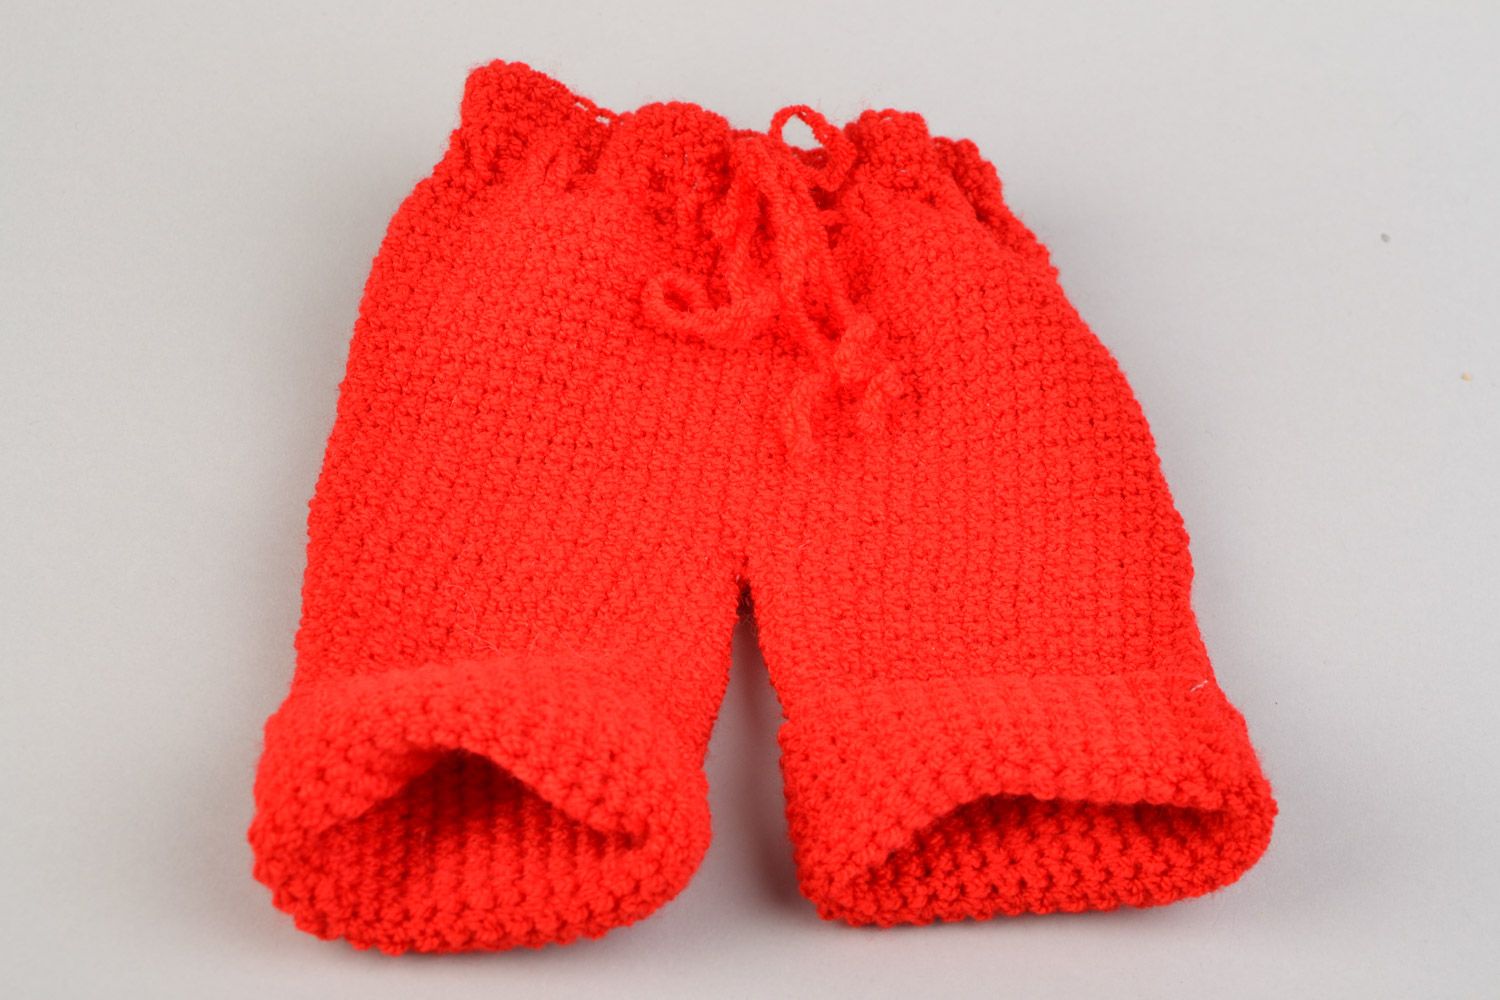 Handmade crocheted stylish red baby pants for kids made of acrylic threads photo 3